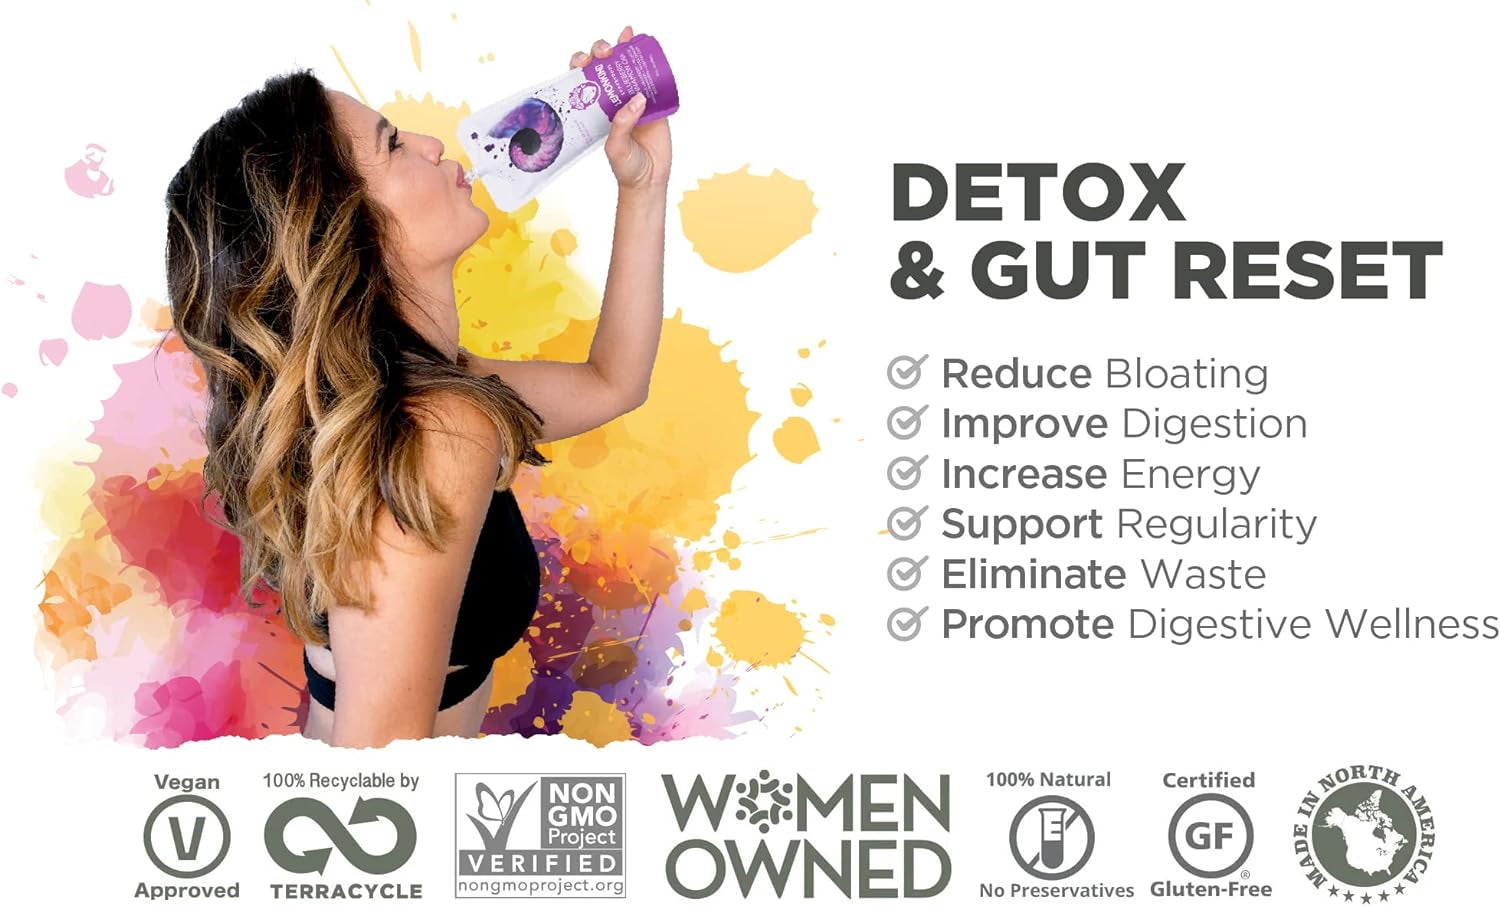 2 Day Gut Balance Juice Cleanse – Quick and Easy Way to Detox, Restore Digestive Equilibrium and Get Rid of Stubborn Bloating – Plant-Based, Non-Gmo & Gluten-Free Certified - 16 Juices (NEW)